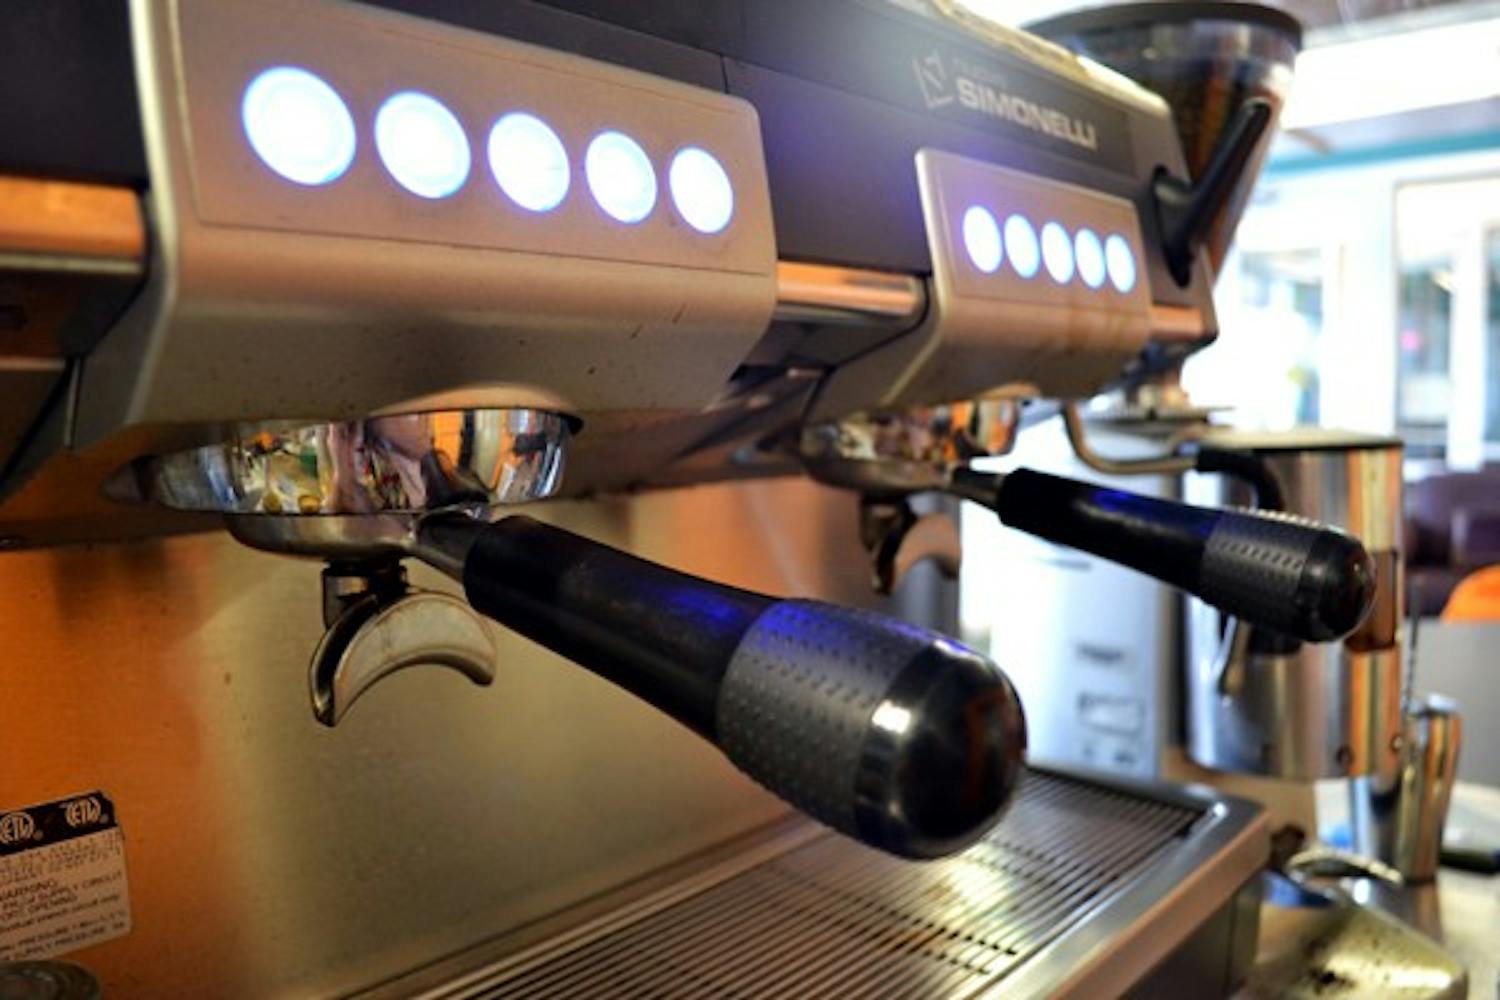 An espresso machine at the Fair Trade Cafe provides fuel to students on the Downtown campus Monday morning. (Photo by Brittany Lea)